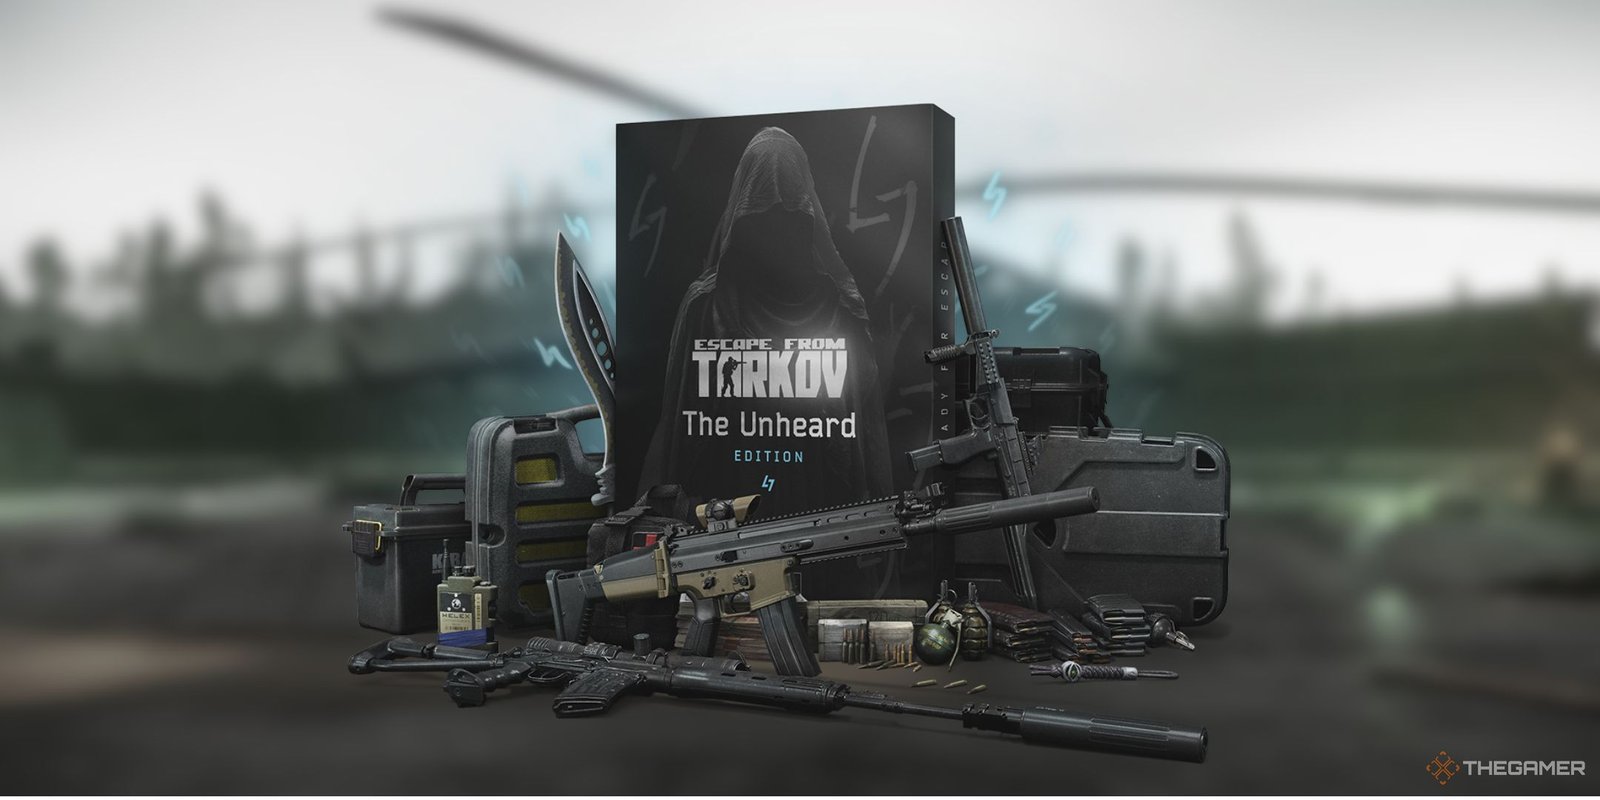 Escape From Tarkov fans saw the new Edition and they're not happy.